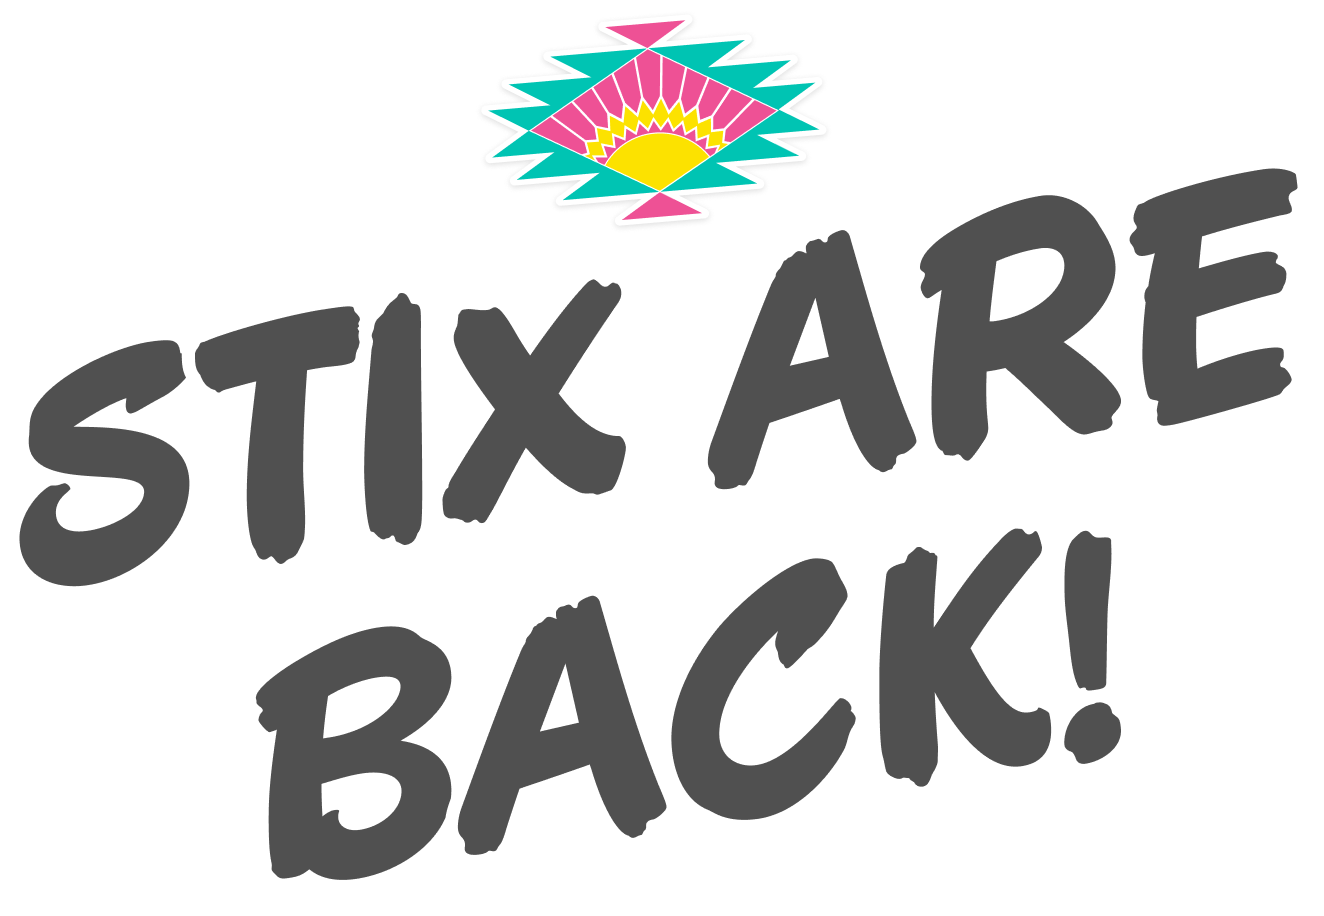 Banner Text - Stix are back